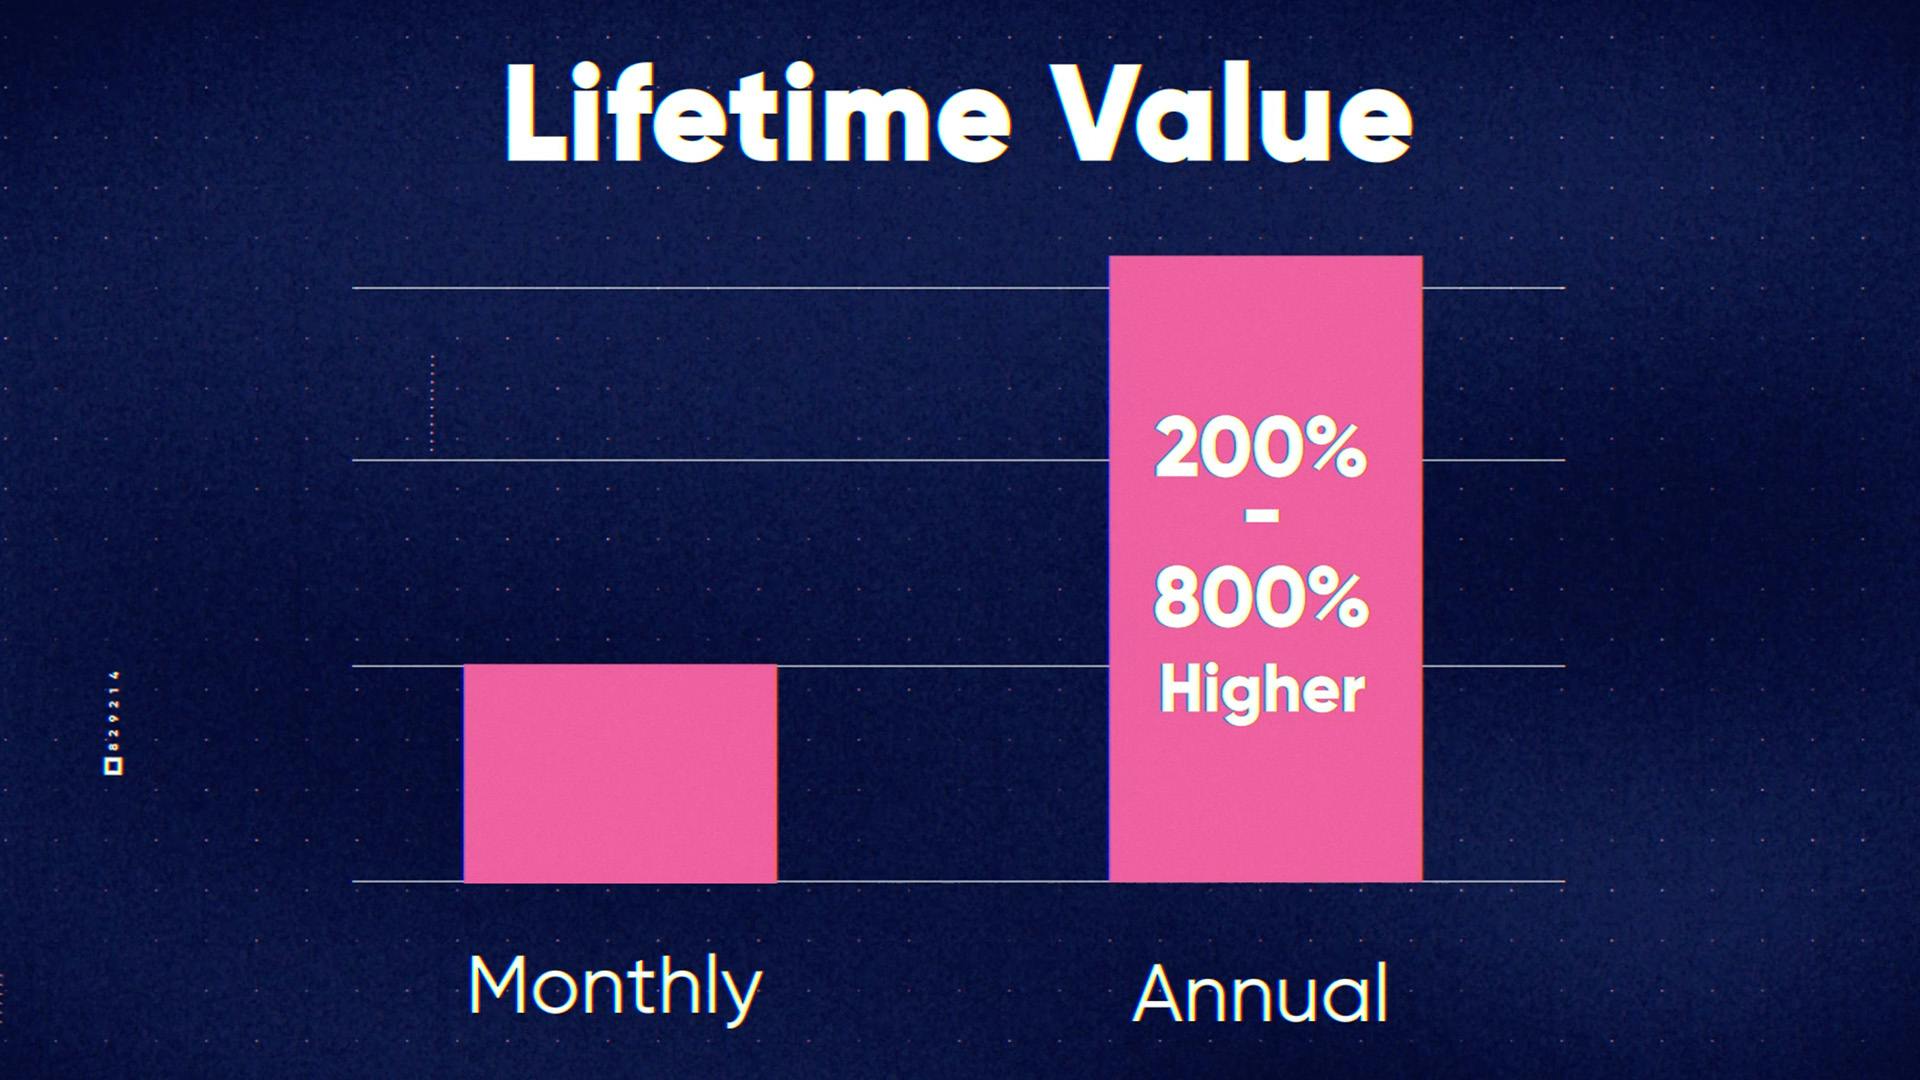 Annual discounts provide 200%-800% higher LTV